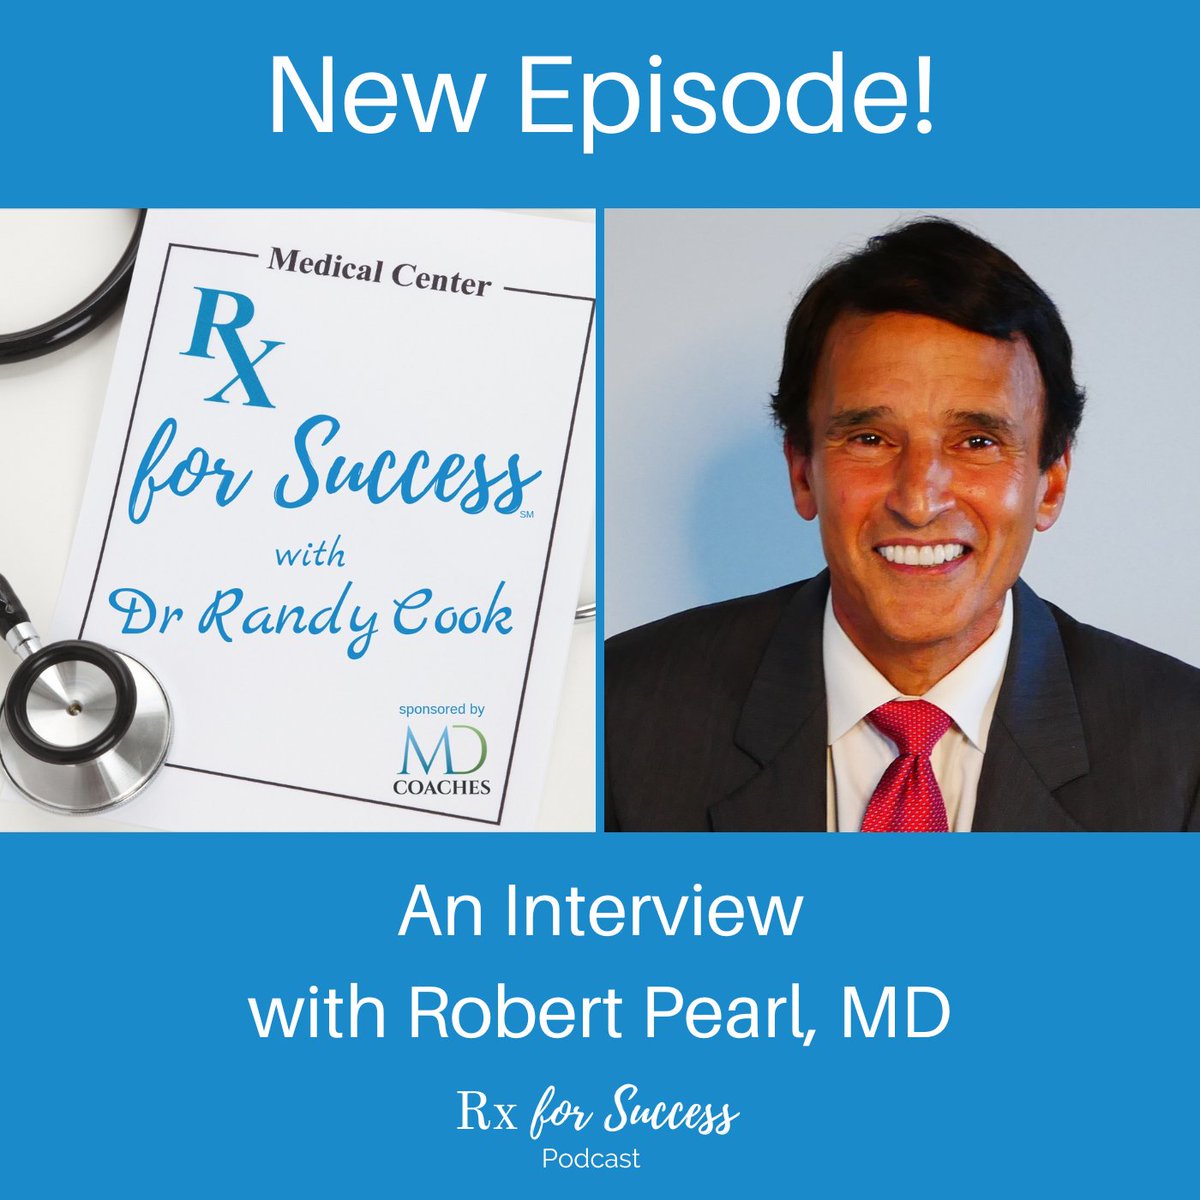 .@RobertPearlMD is this week's guest on @CoachesMd's #rxforsuccess podcast! Listen to him talk about his new book, #AI in #healthcare and much more with host Dr. Randy Cook at mymdcoaches.com/podcast/episod…!